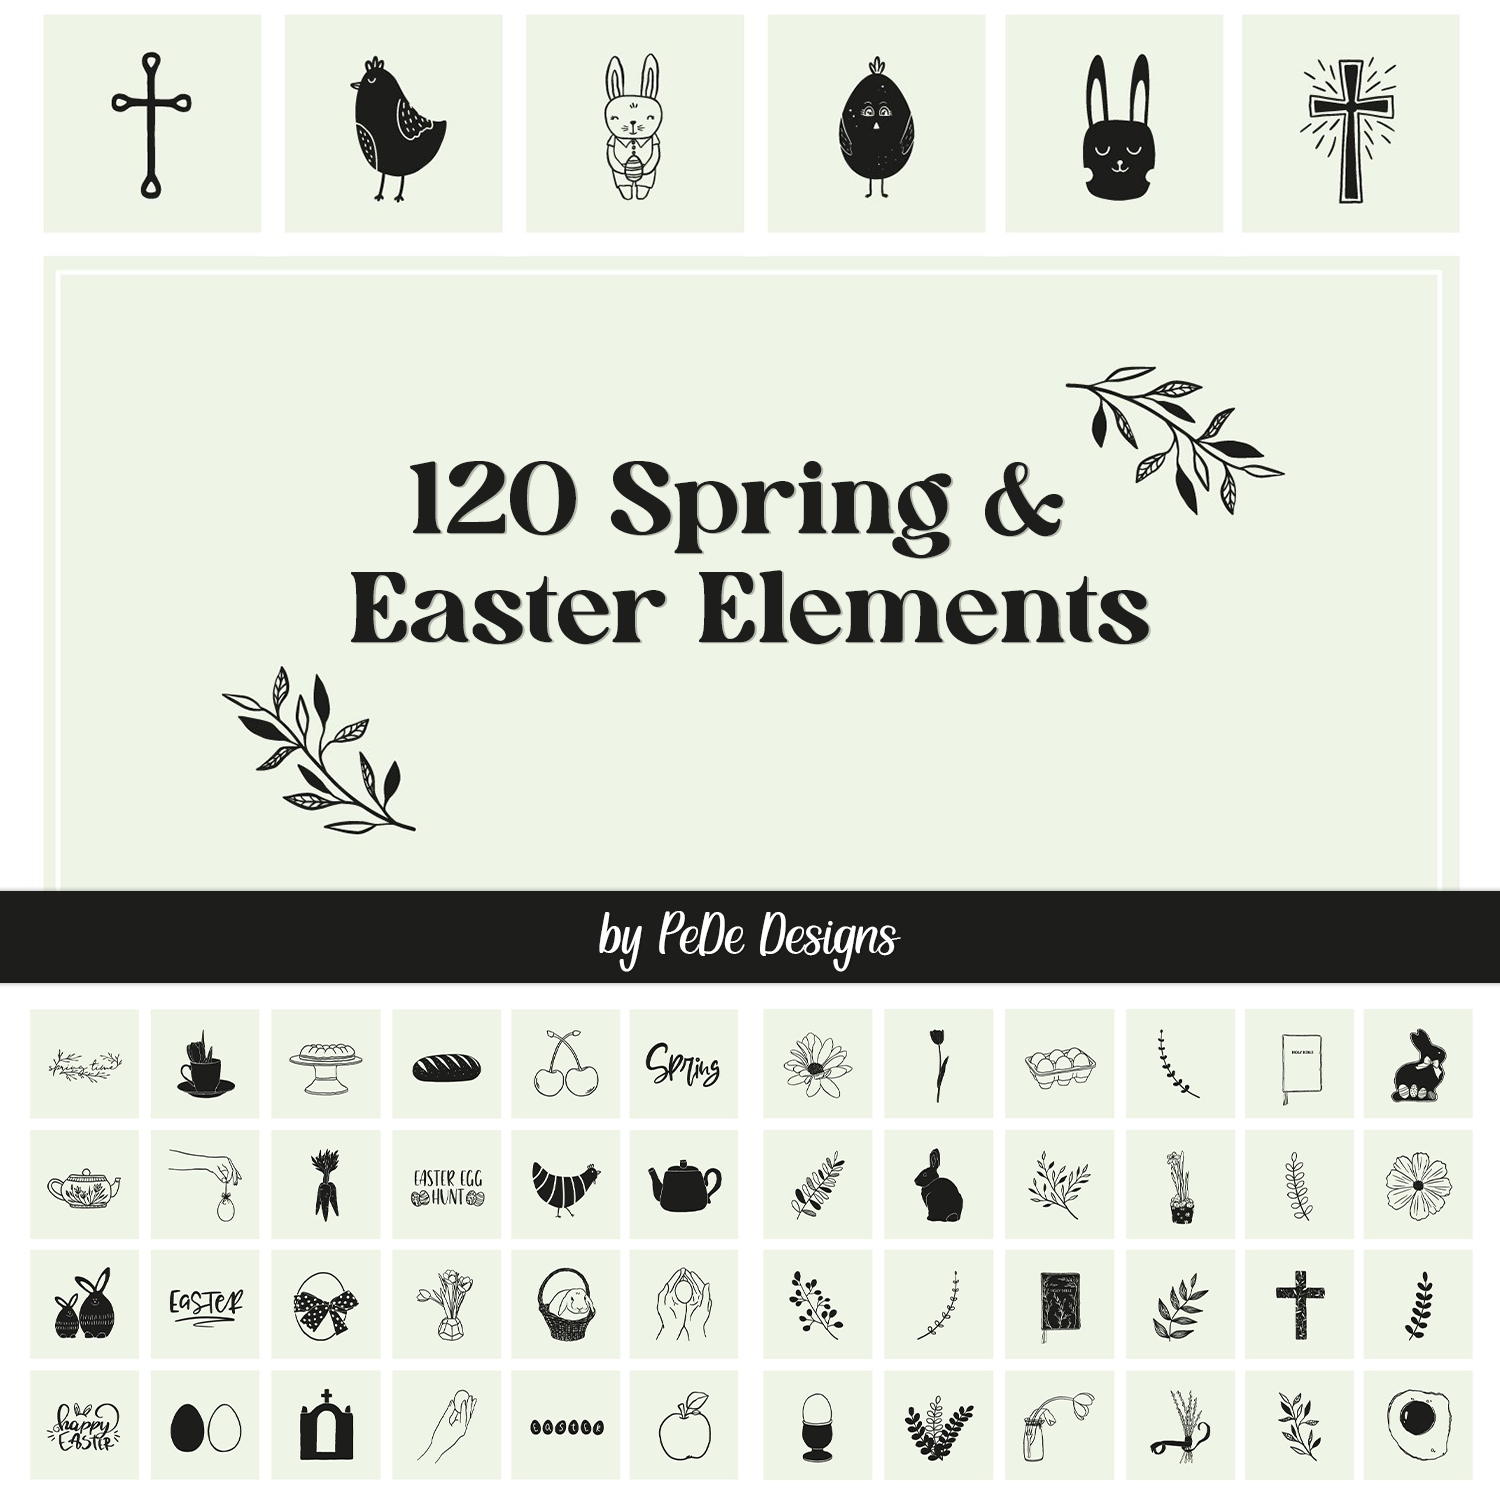 120 Spring & Easter Elements cover.